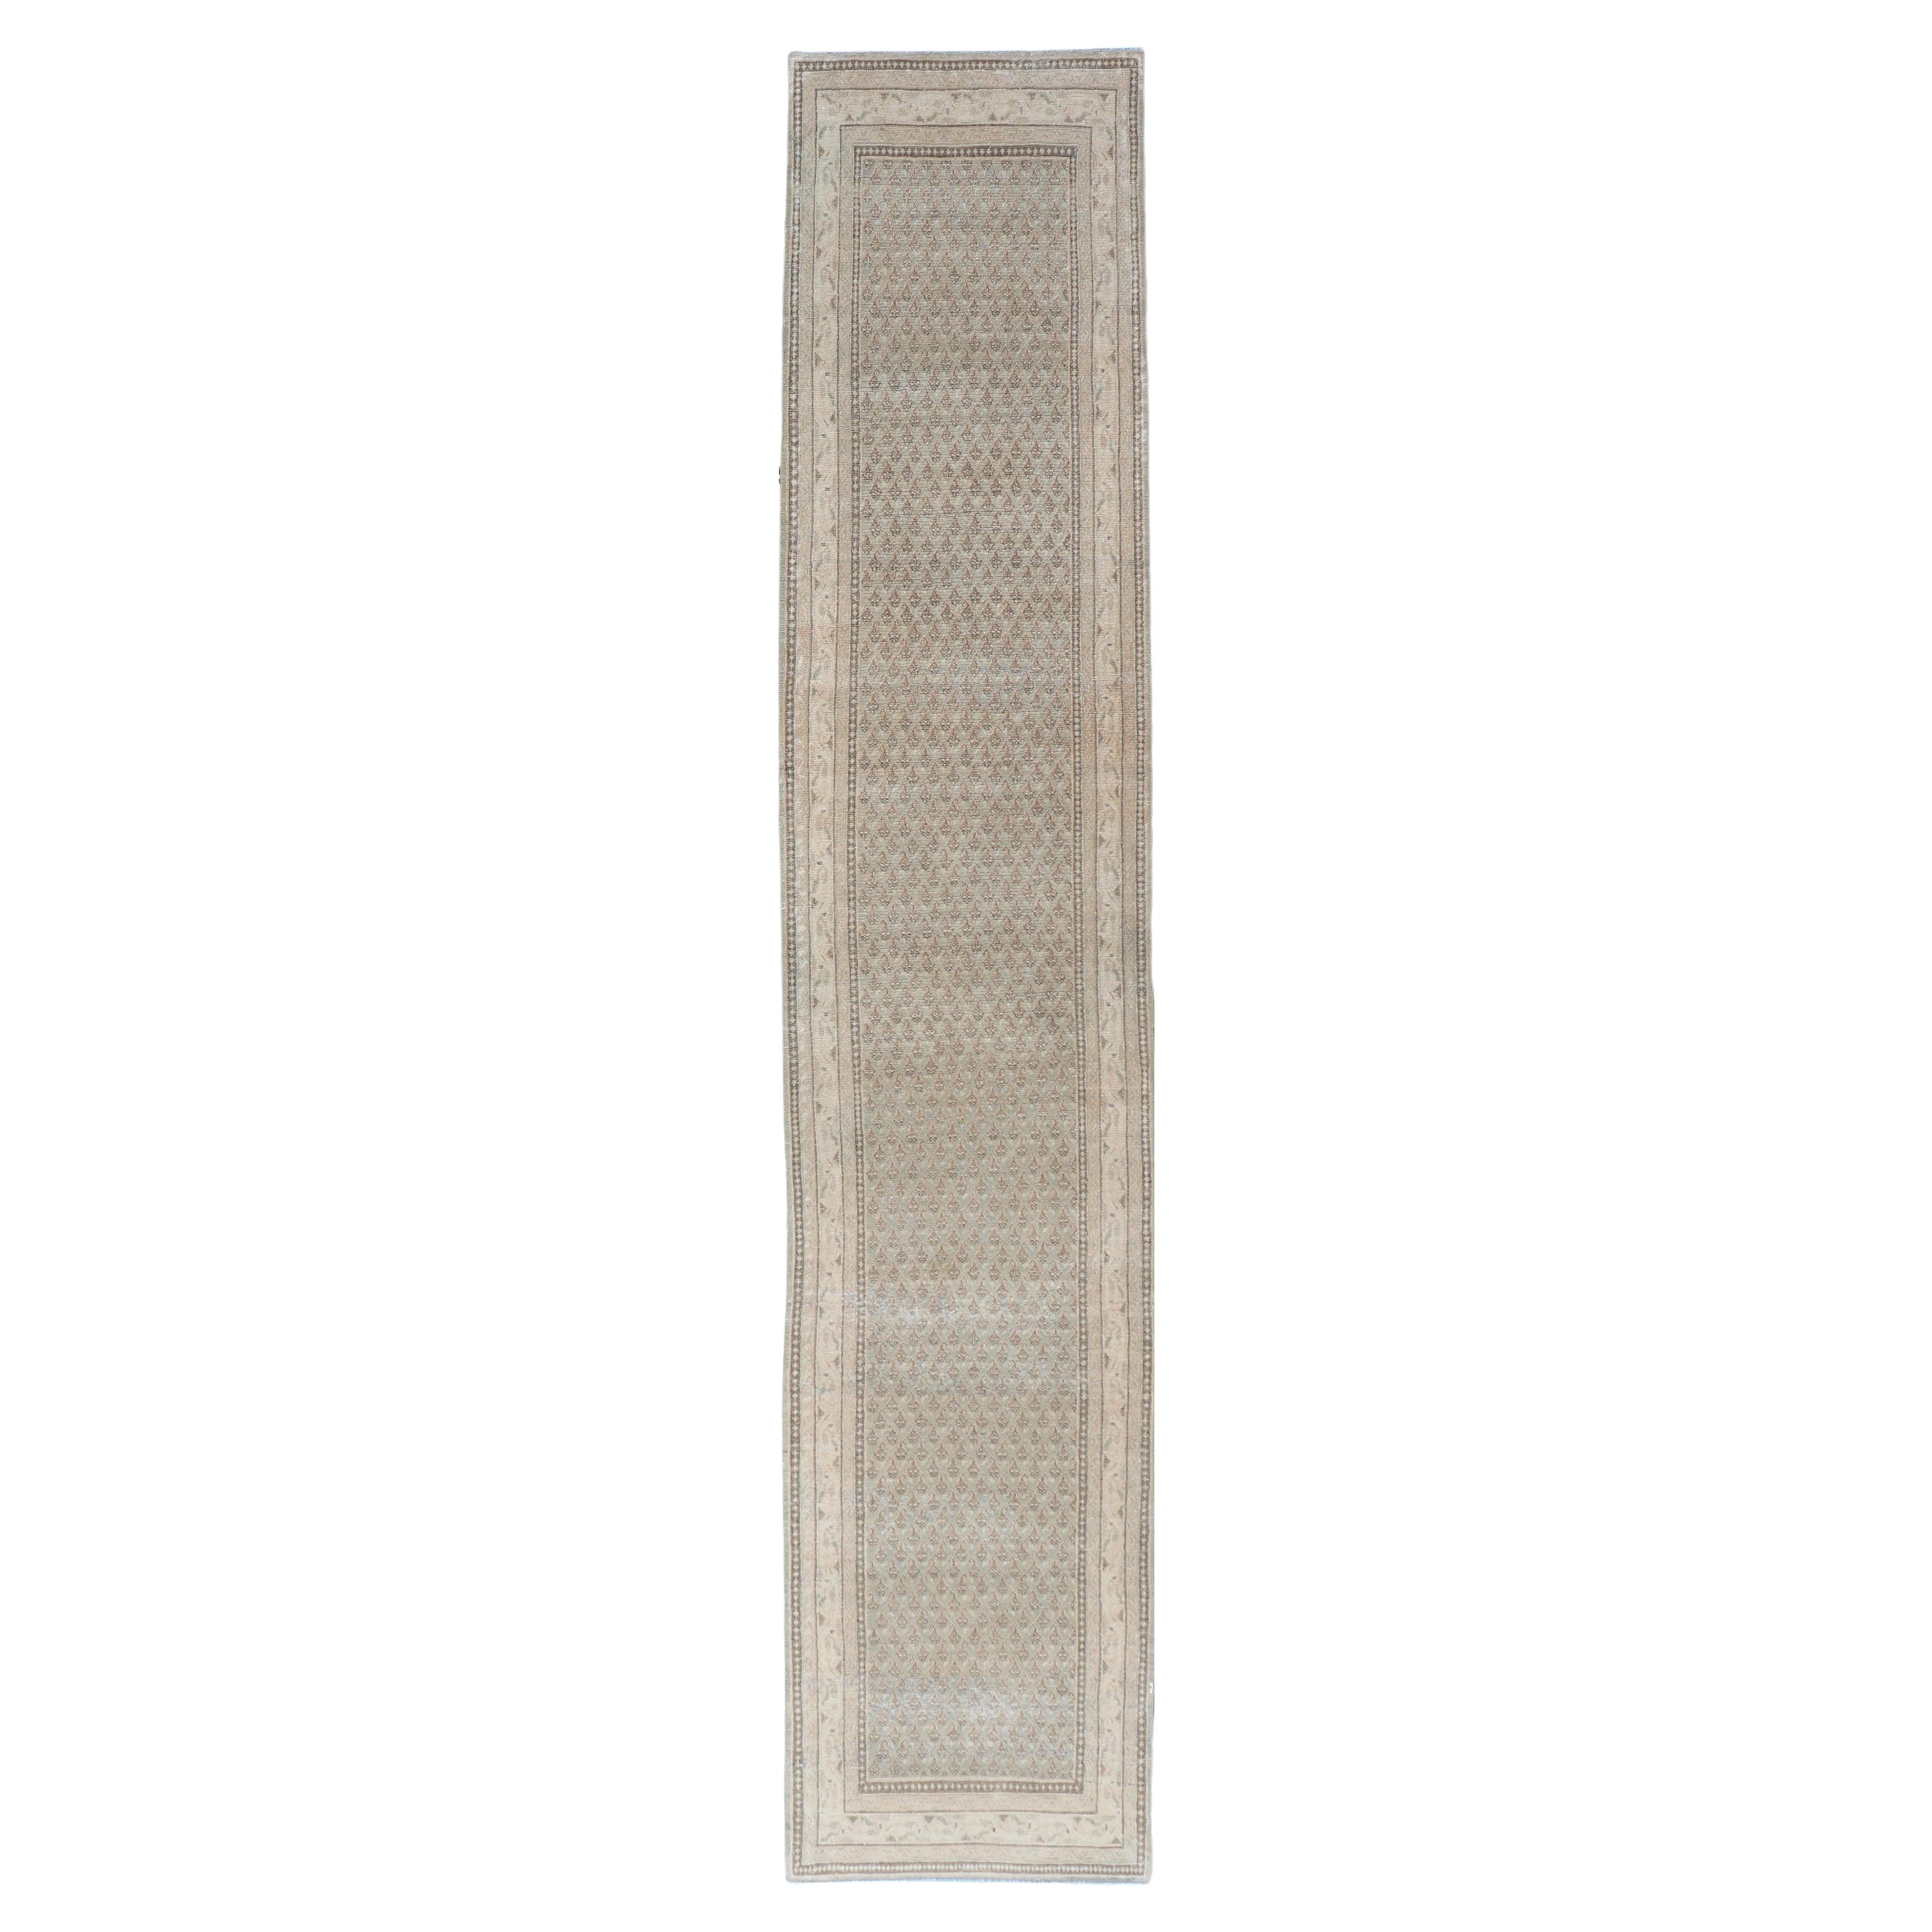 Long & Narrow Vintage Tabriz Runner with Taupe, Soft Blue-Gray, and Light Brown  For Sale